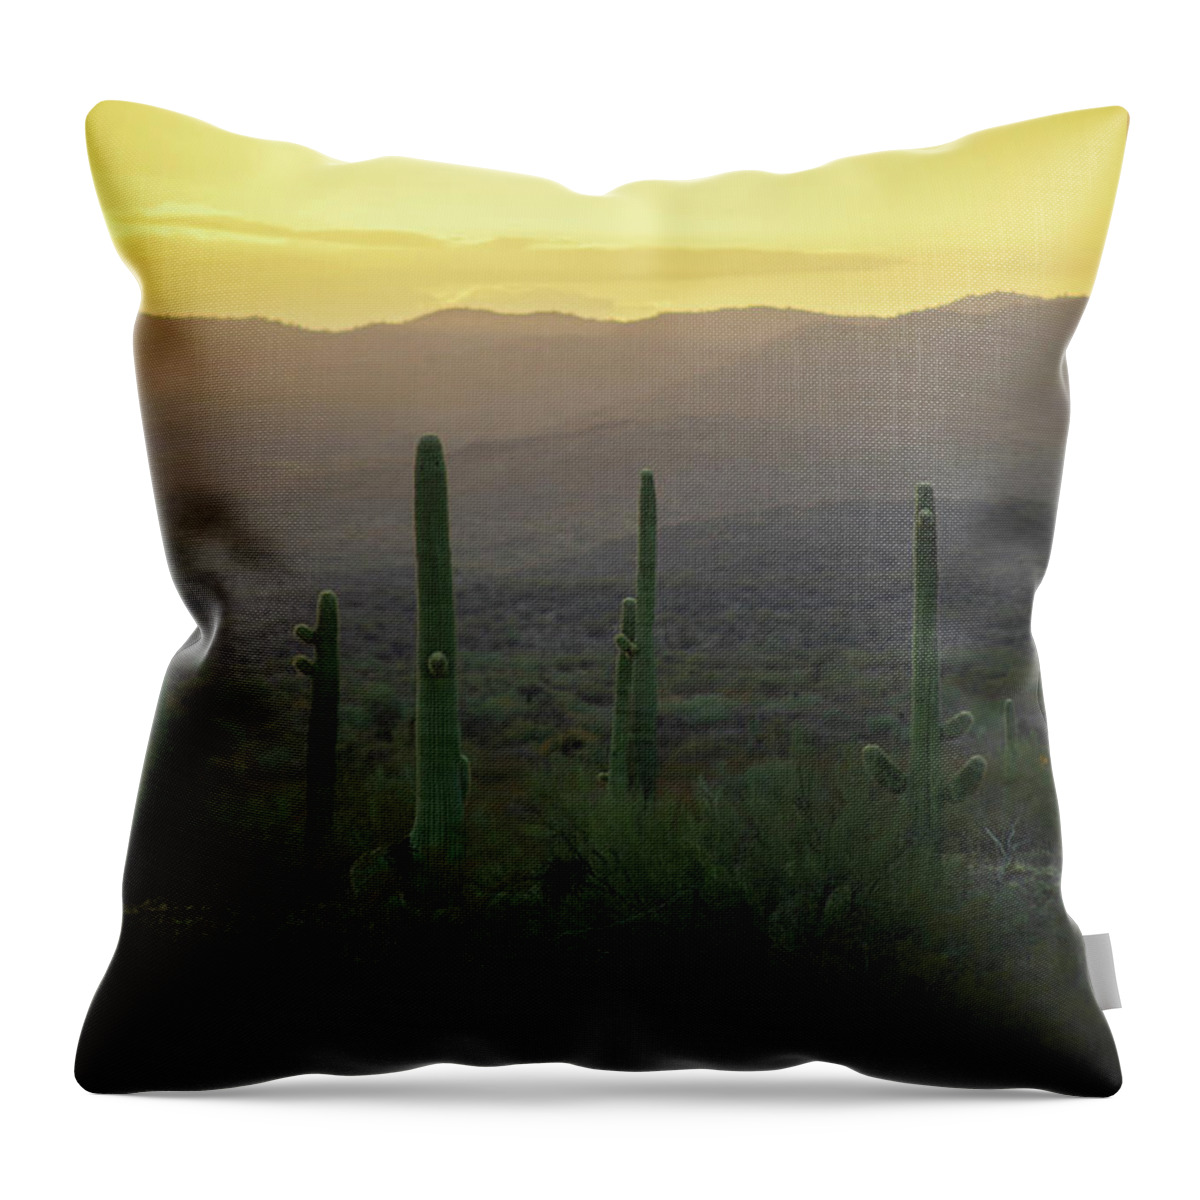 Landscape Throw Pillow featuring the photograph Cactus Huddle by Go and Flow Photos